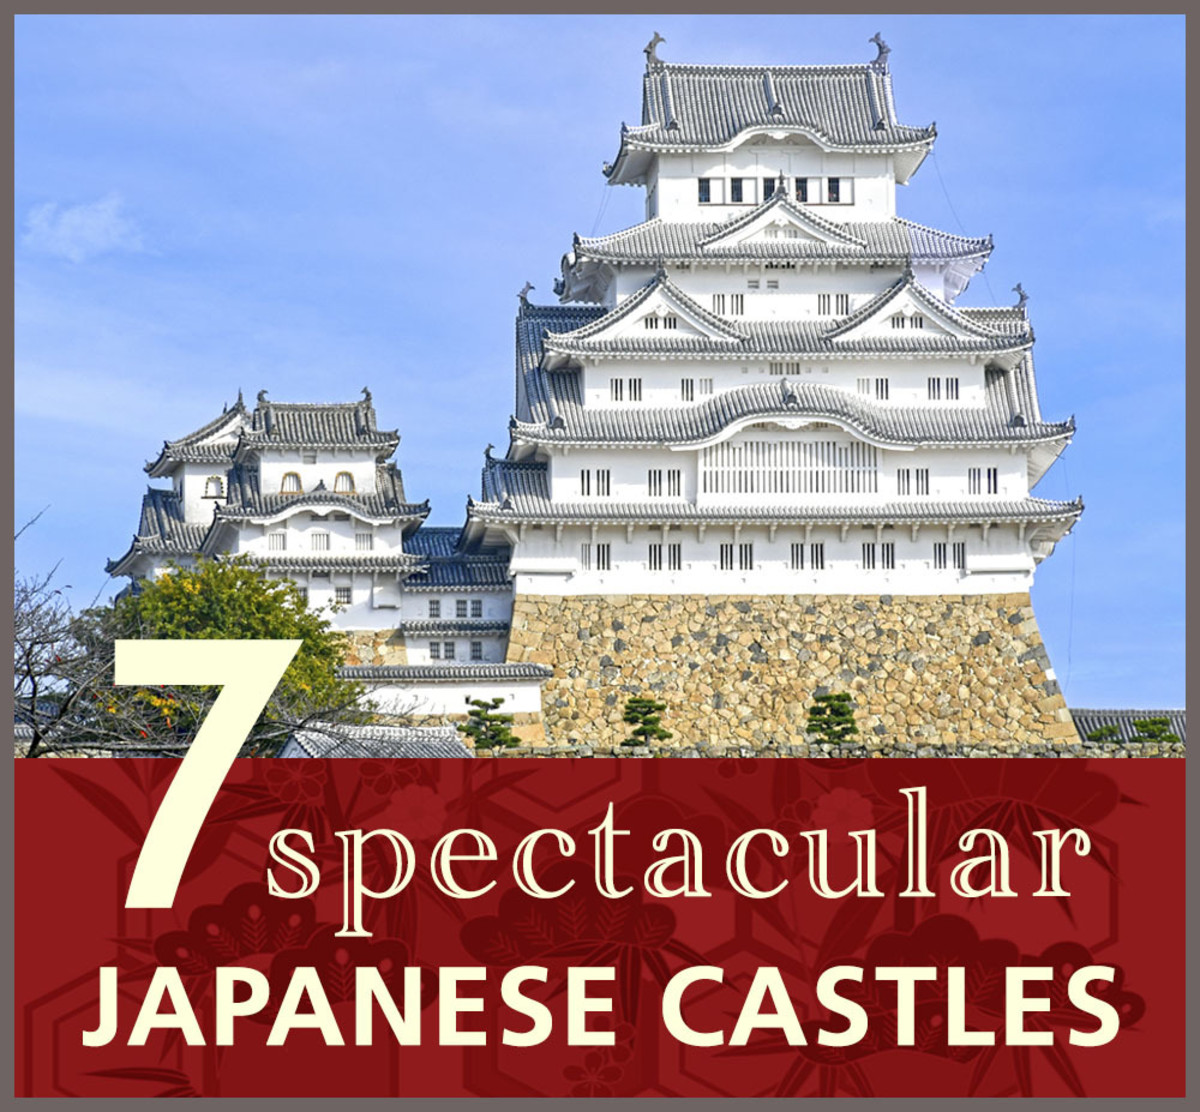 7 Spectacular Japanese Castles You Have to Visit (With Itineraries)